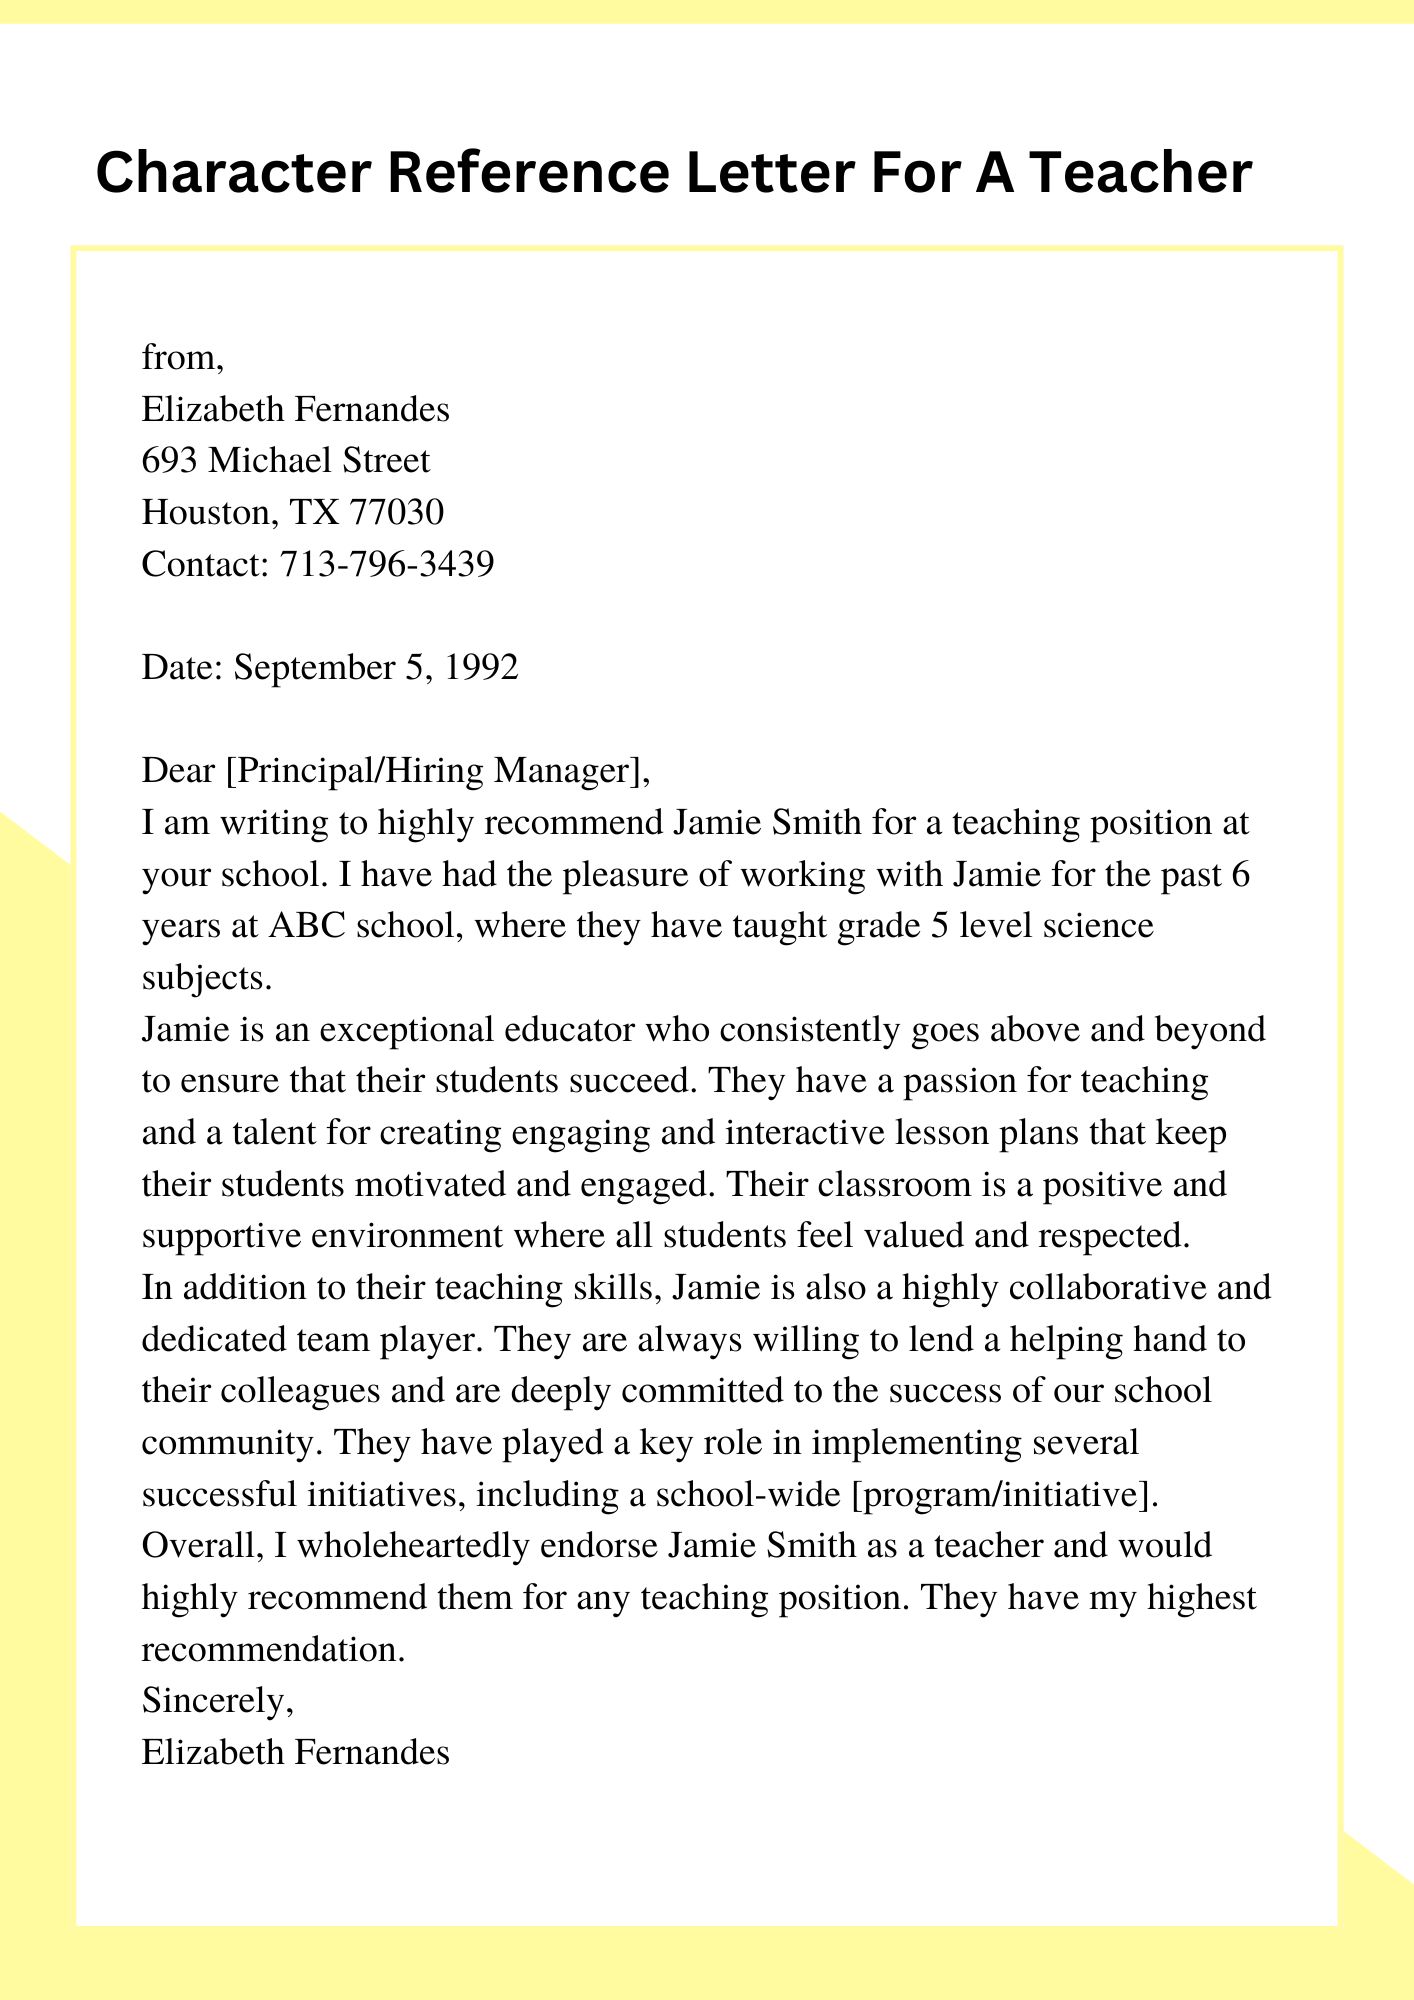 Character Reference Letter For A Teacher 